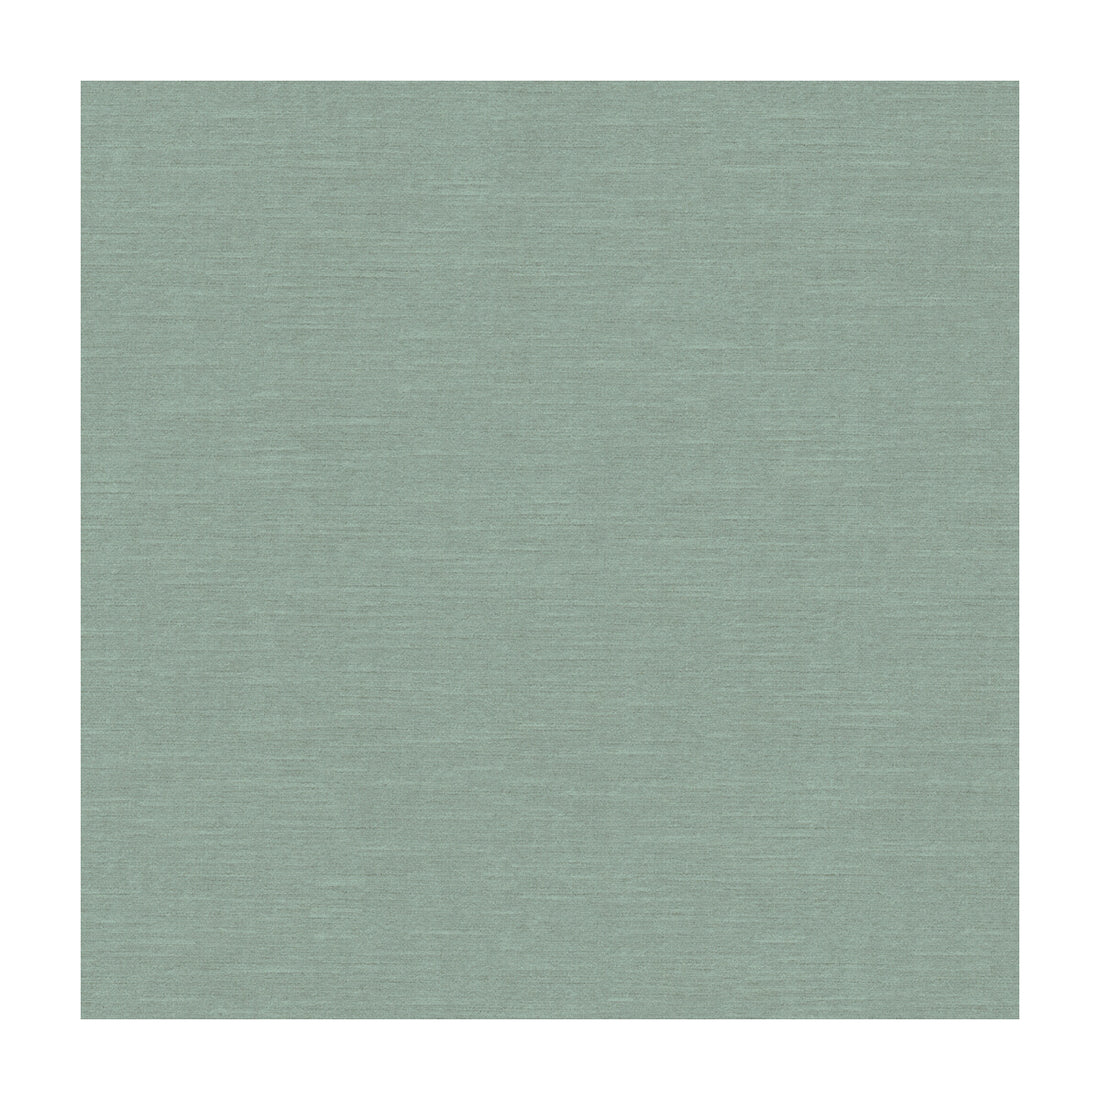 Venetian fabric in aqua color - pattern 31326.135.0 - by Kravet Design in the The Complete Velvet collection